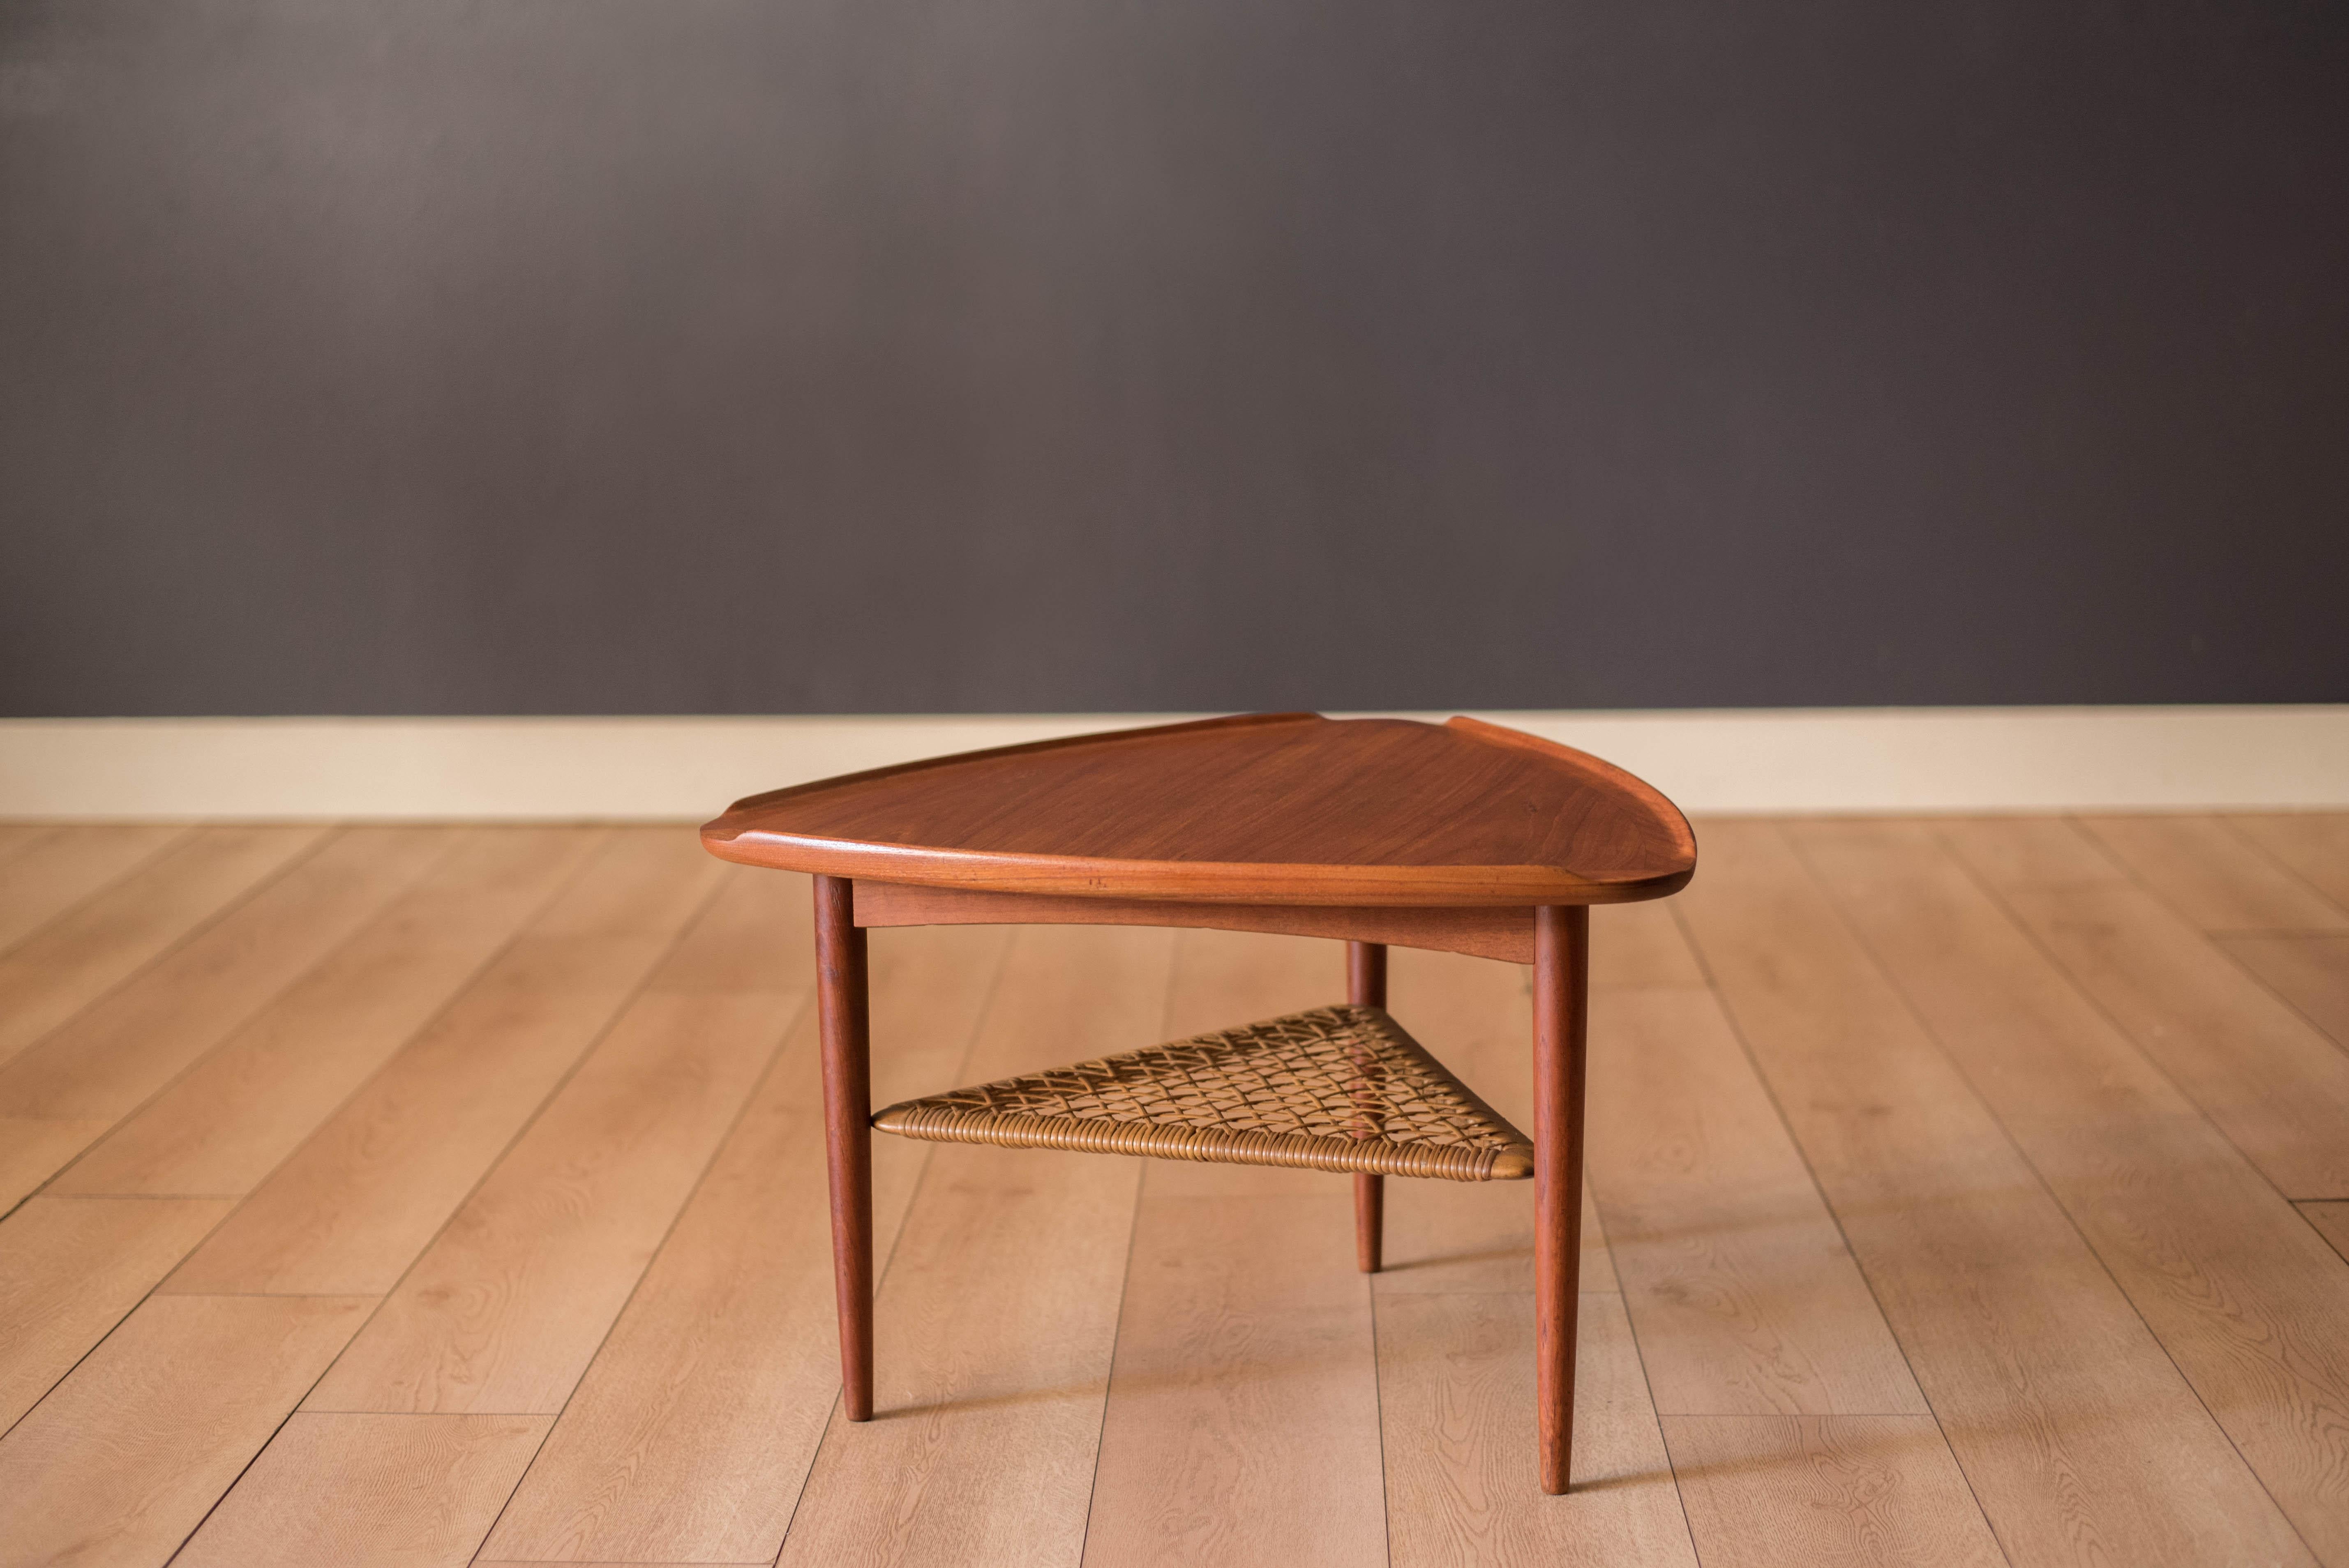 Mid Century triangular occasional guitar pick side table in teak designed by Poul Jensen imported by Selig, Denmark. This piece features a unique raised edge top and lower tier magazine shelf made of woven cane.

Lower tier shelf 8.25